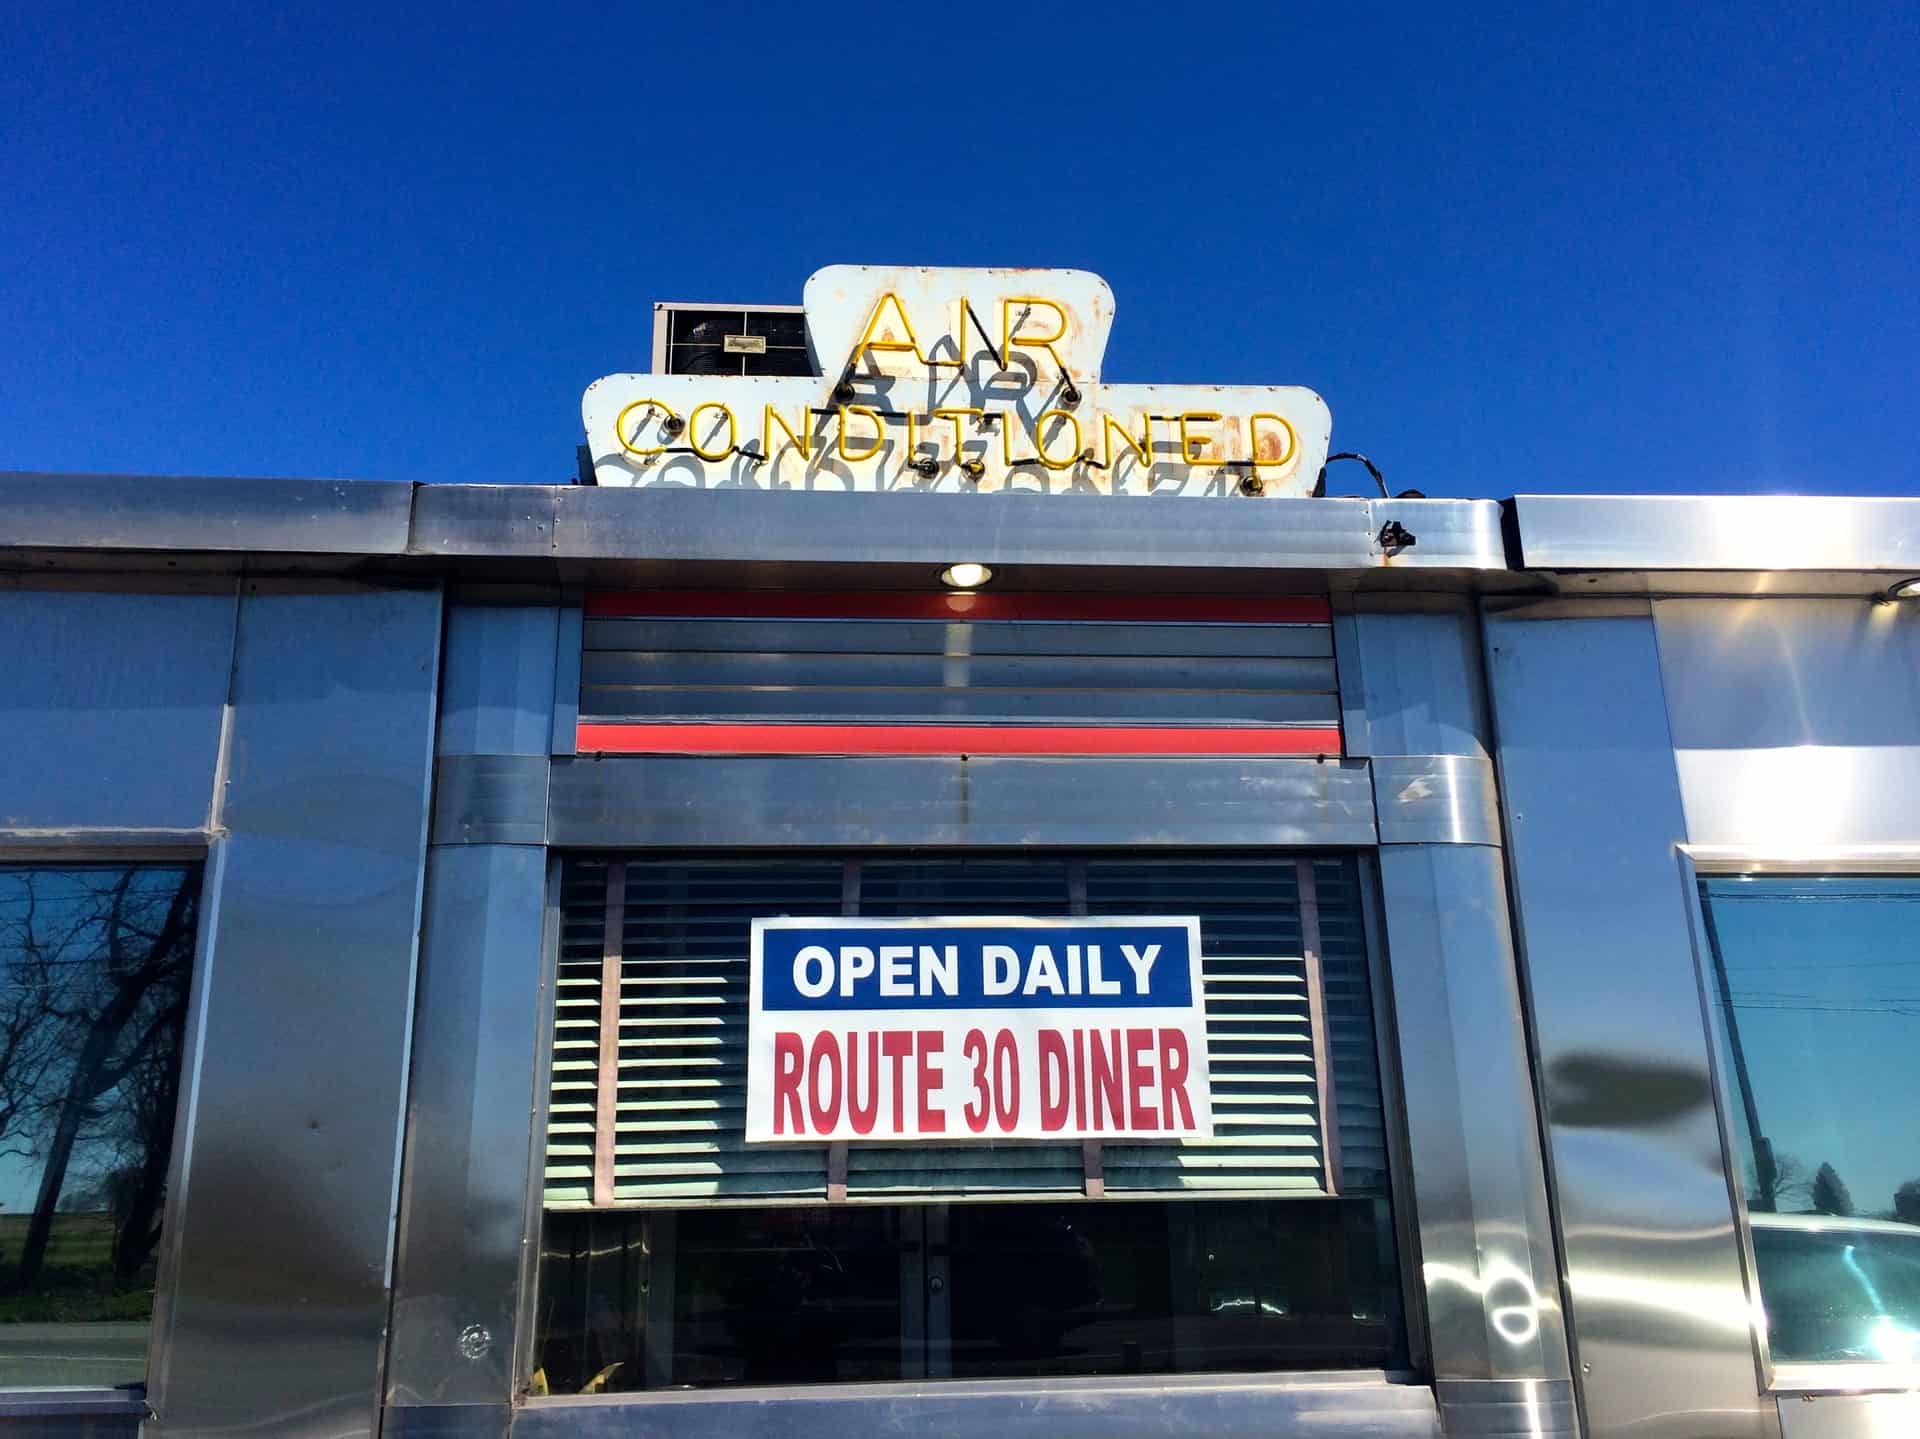 Route 30 Diner Ronks PA - Retro Roadmap 2017